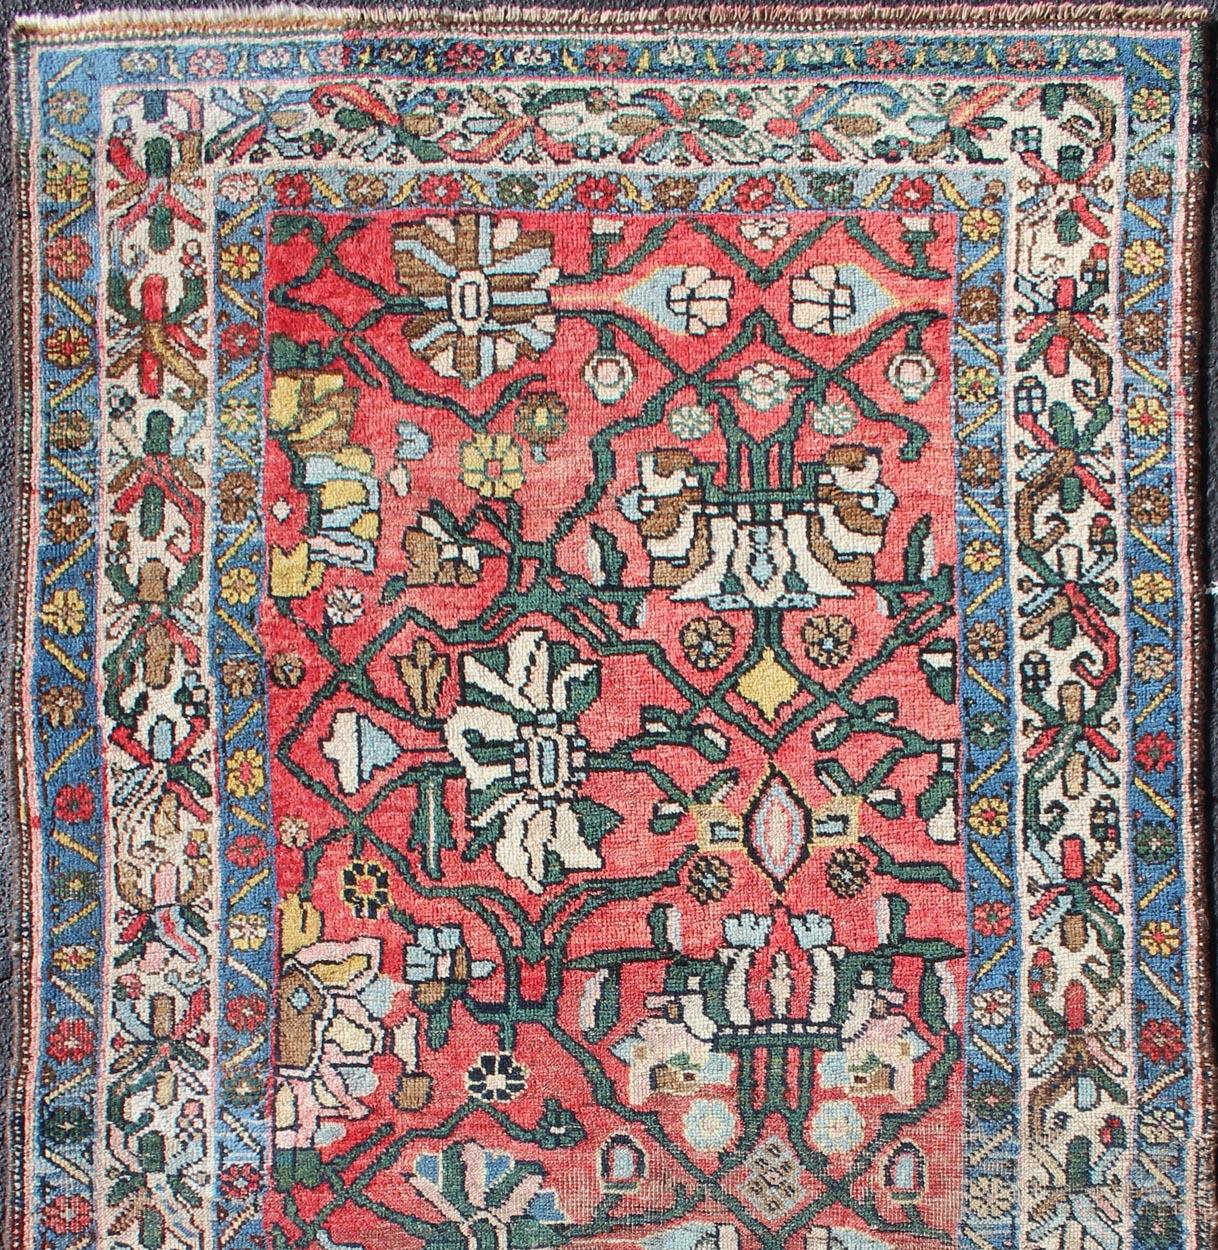 Soft Red background antique Persian Bidjar rug with floral motifs, rug H-411-12, country of origin / type: Iran / Tabriz, circa 1900

This antique Persian Bidjar carpet features multi colors and a a Large florals, complemented by floral motifs in